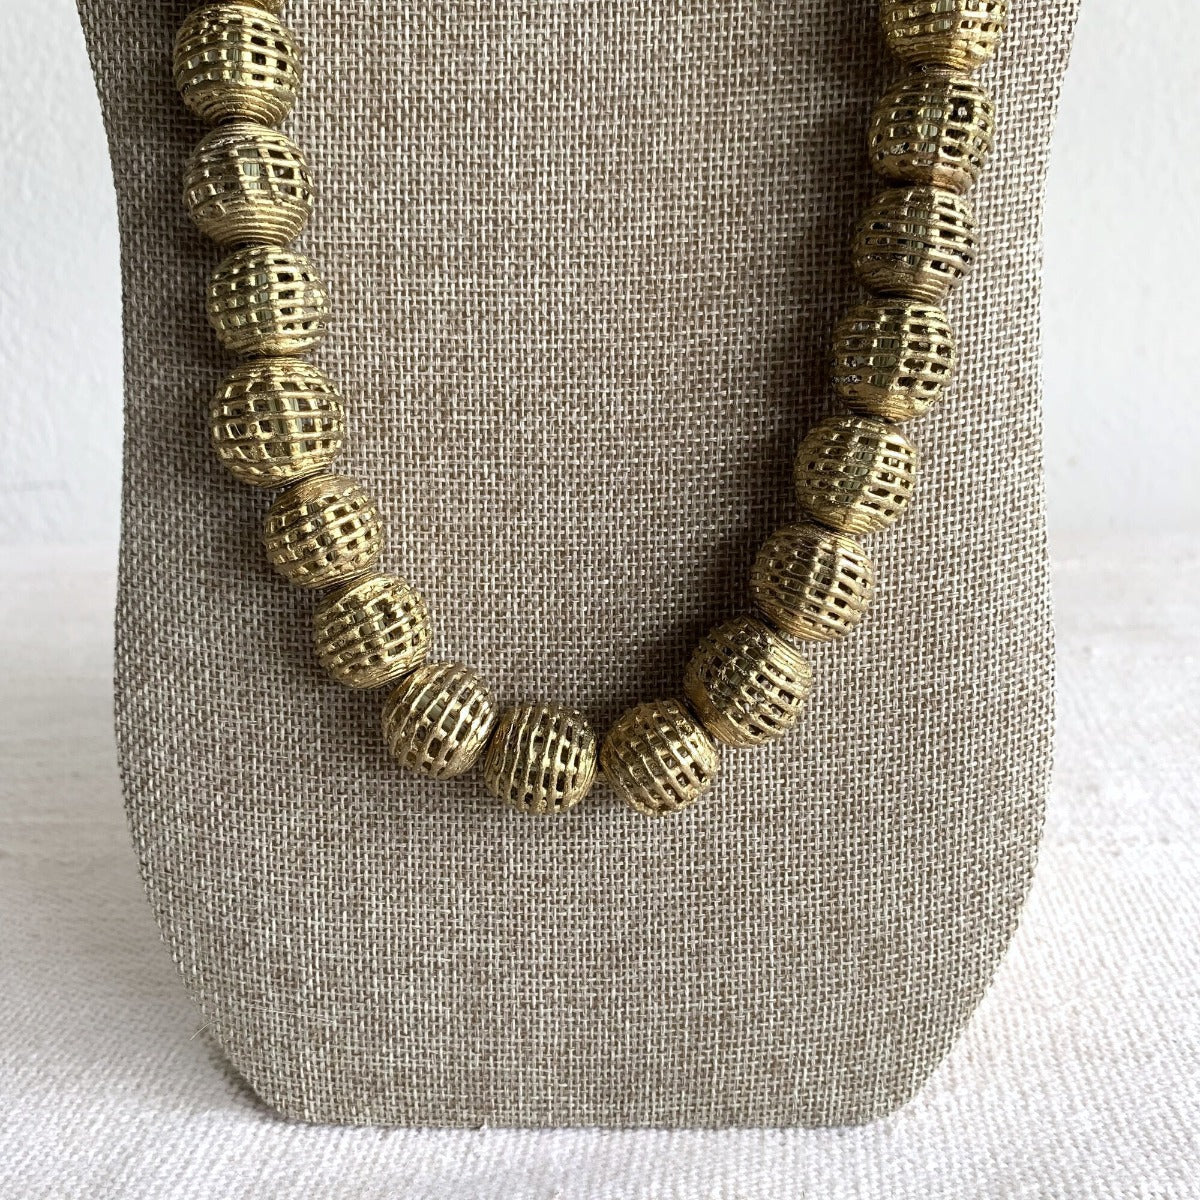 Vintage African Trade Beads Necklace Ghana Ghanaian Krobo Powder Glass  Beaded Long Tribal Ethnic Handmade Colorful Statement Jewelry - Etsy